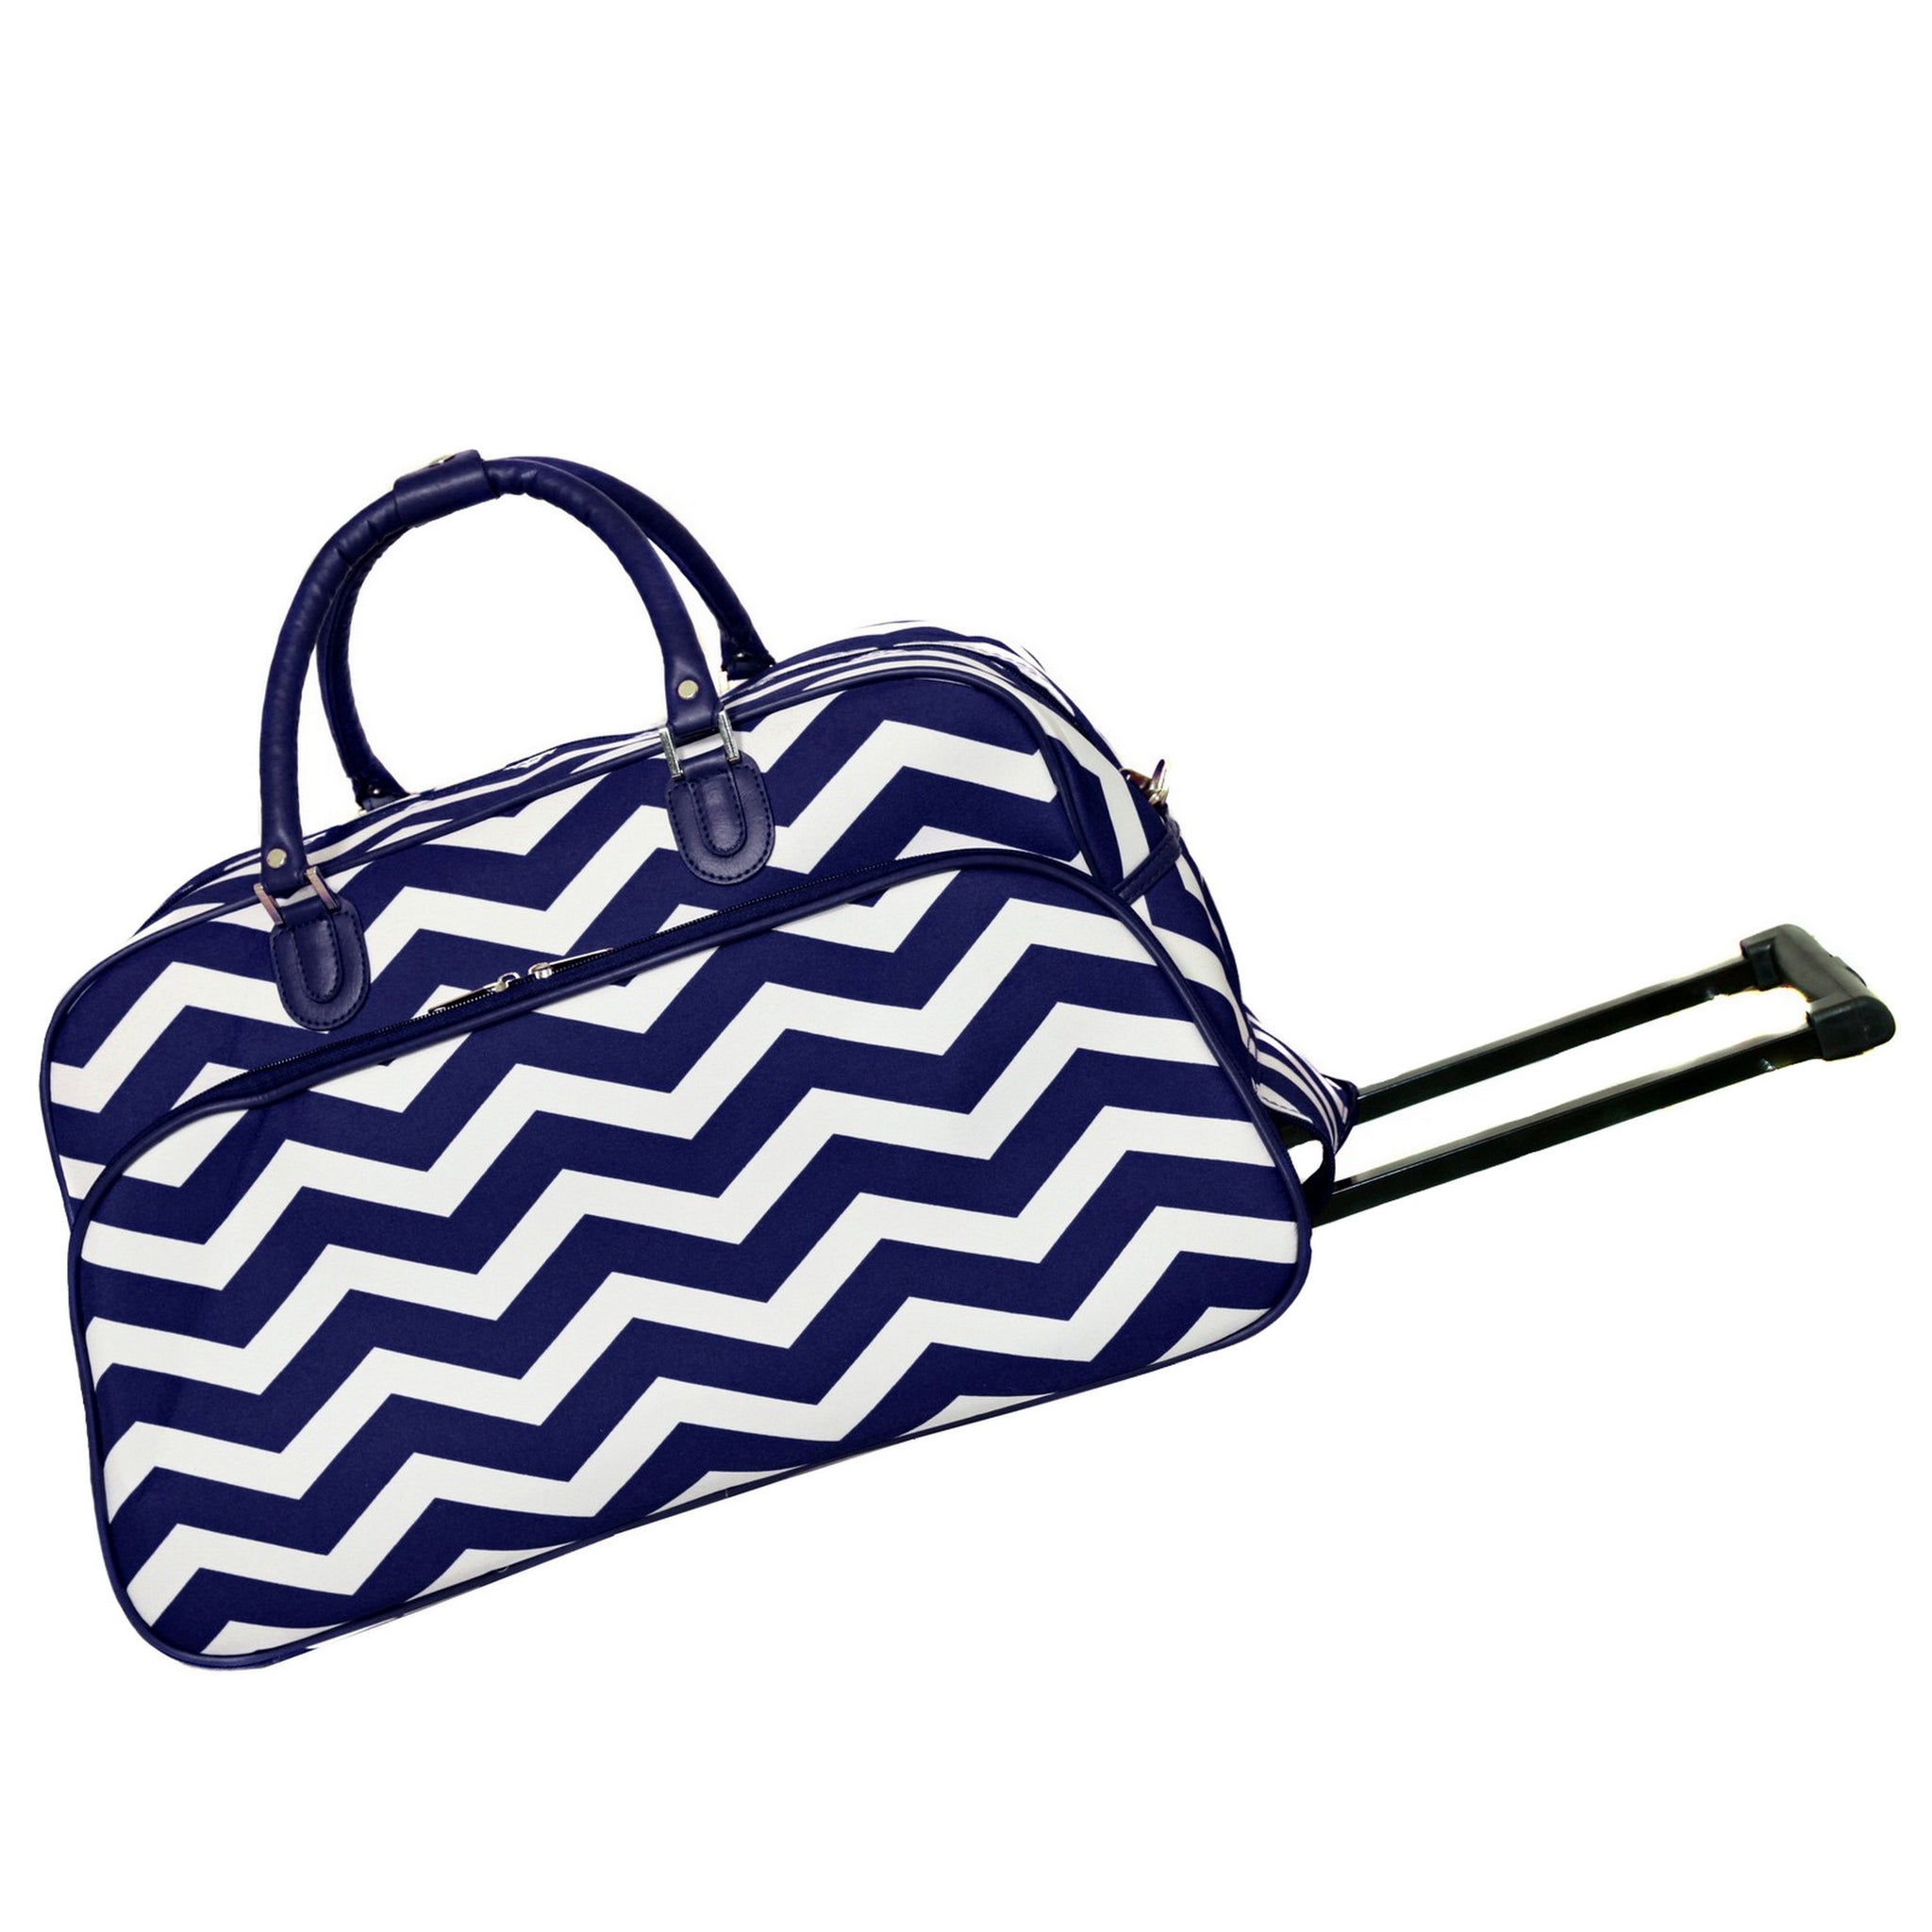 CalBags Chevron 21" Rolling Carry-On Duffel Bags